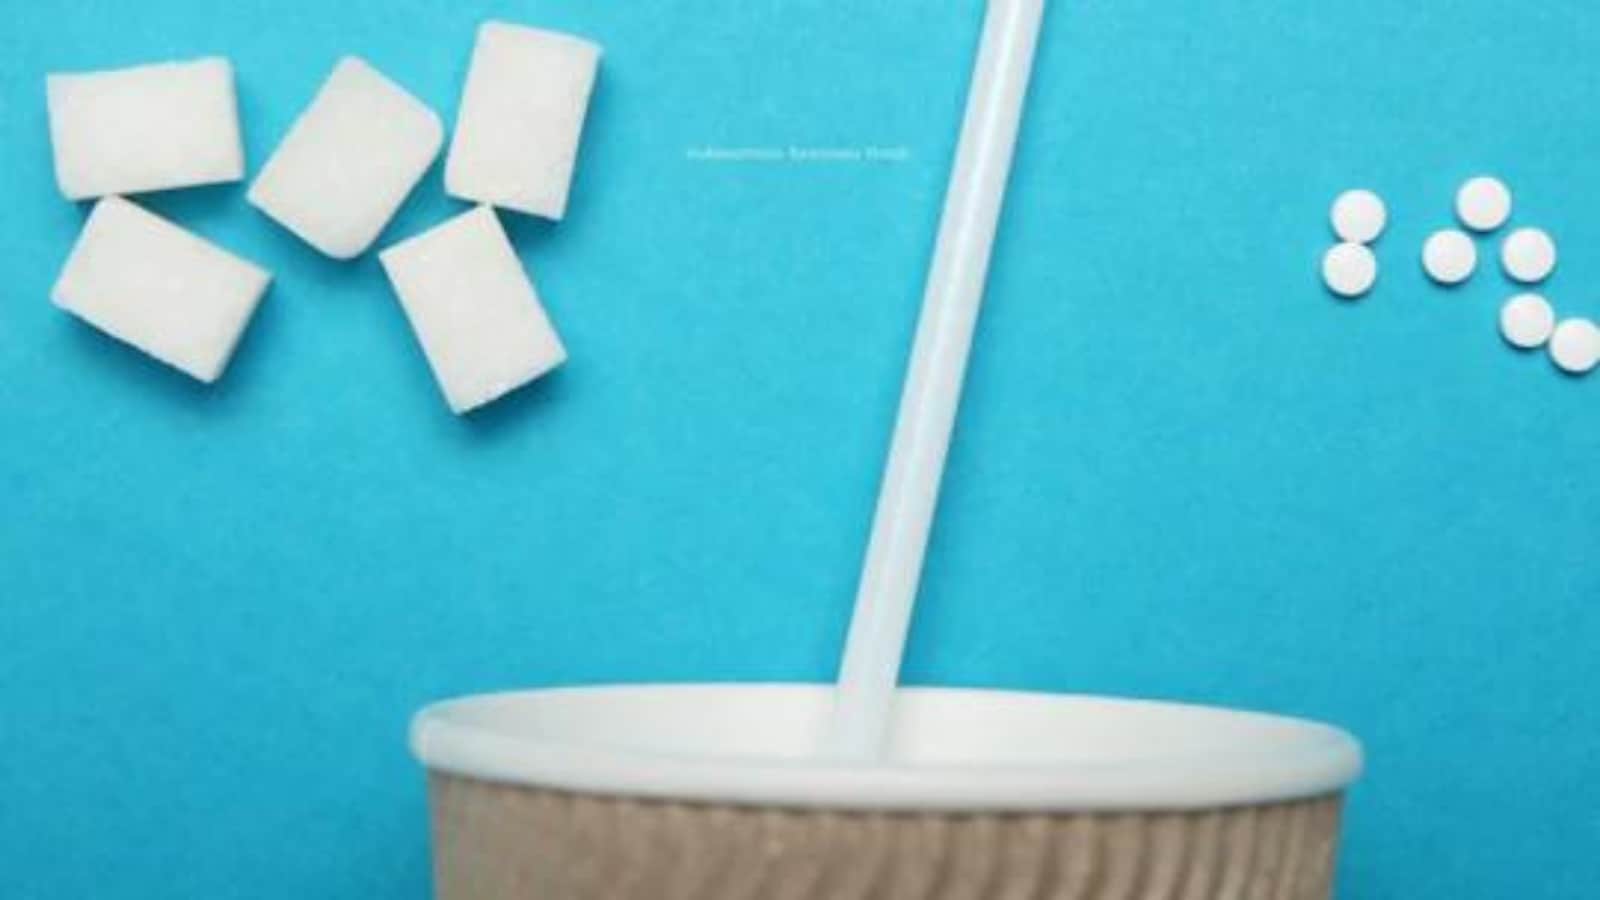 Artificial Sweeteners Increase The Risk of Cancer By 13, Claims New